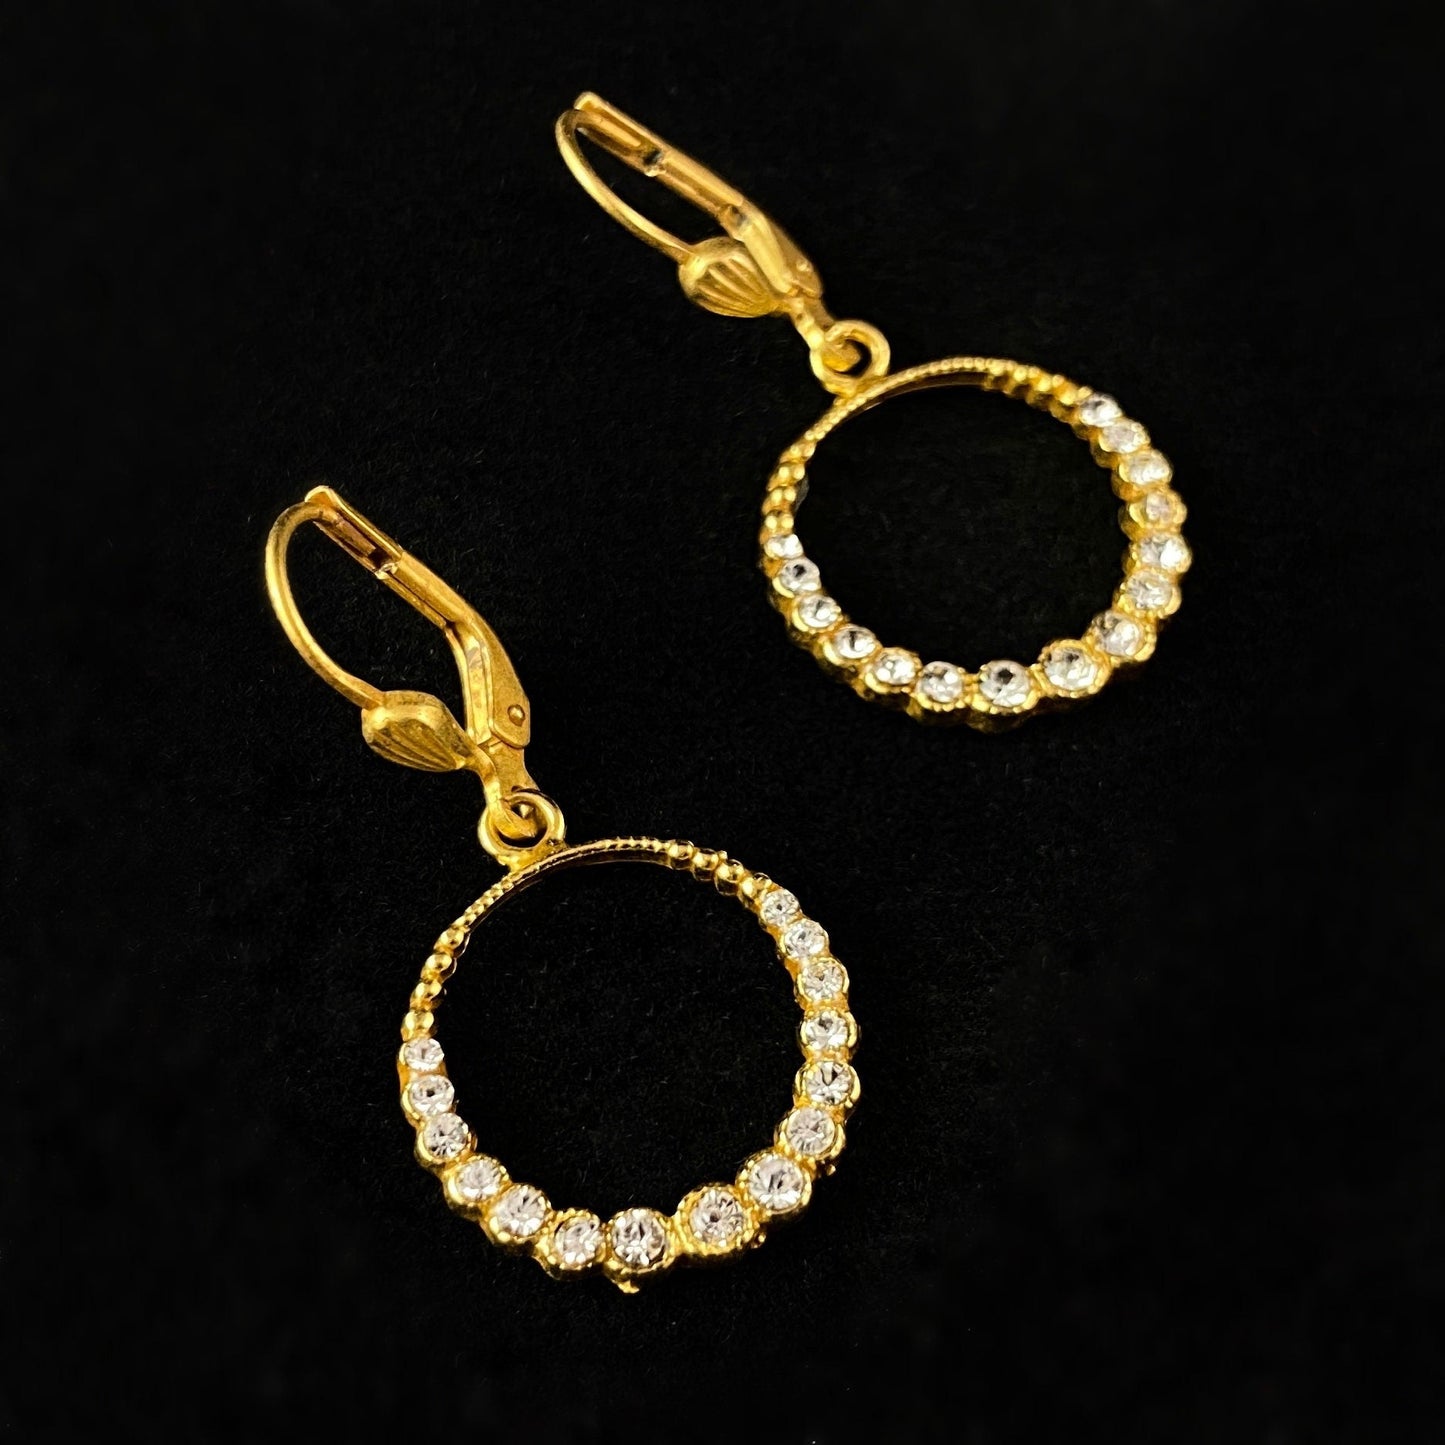 Gold Circle Earrings with Clear Swarovski Crystals - La Vie Parisienne by Catherine Popesco